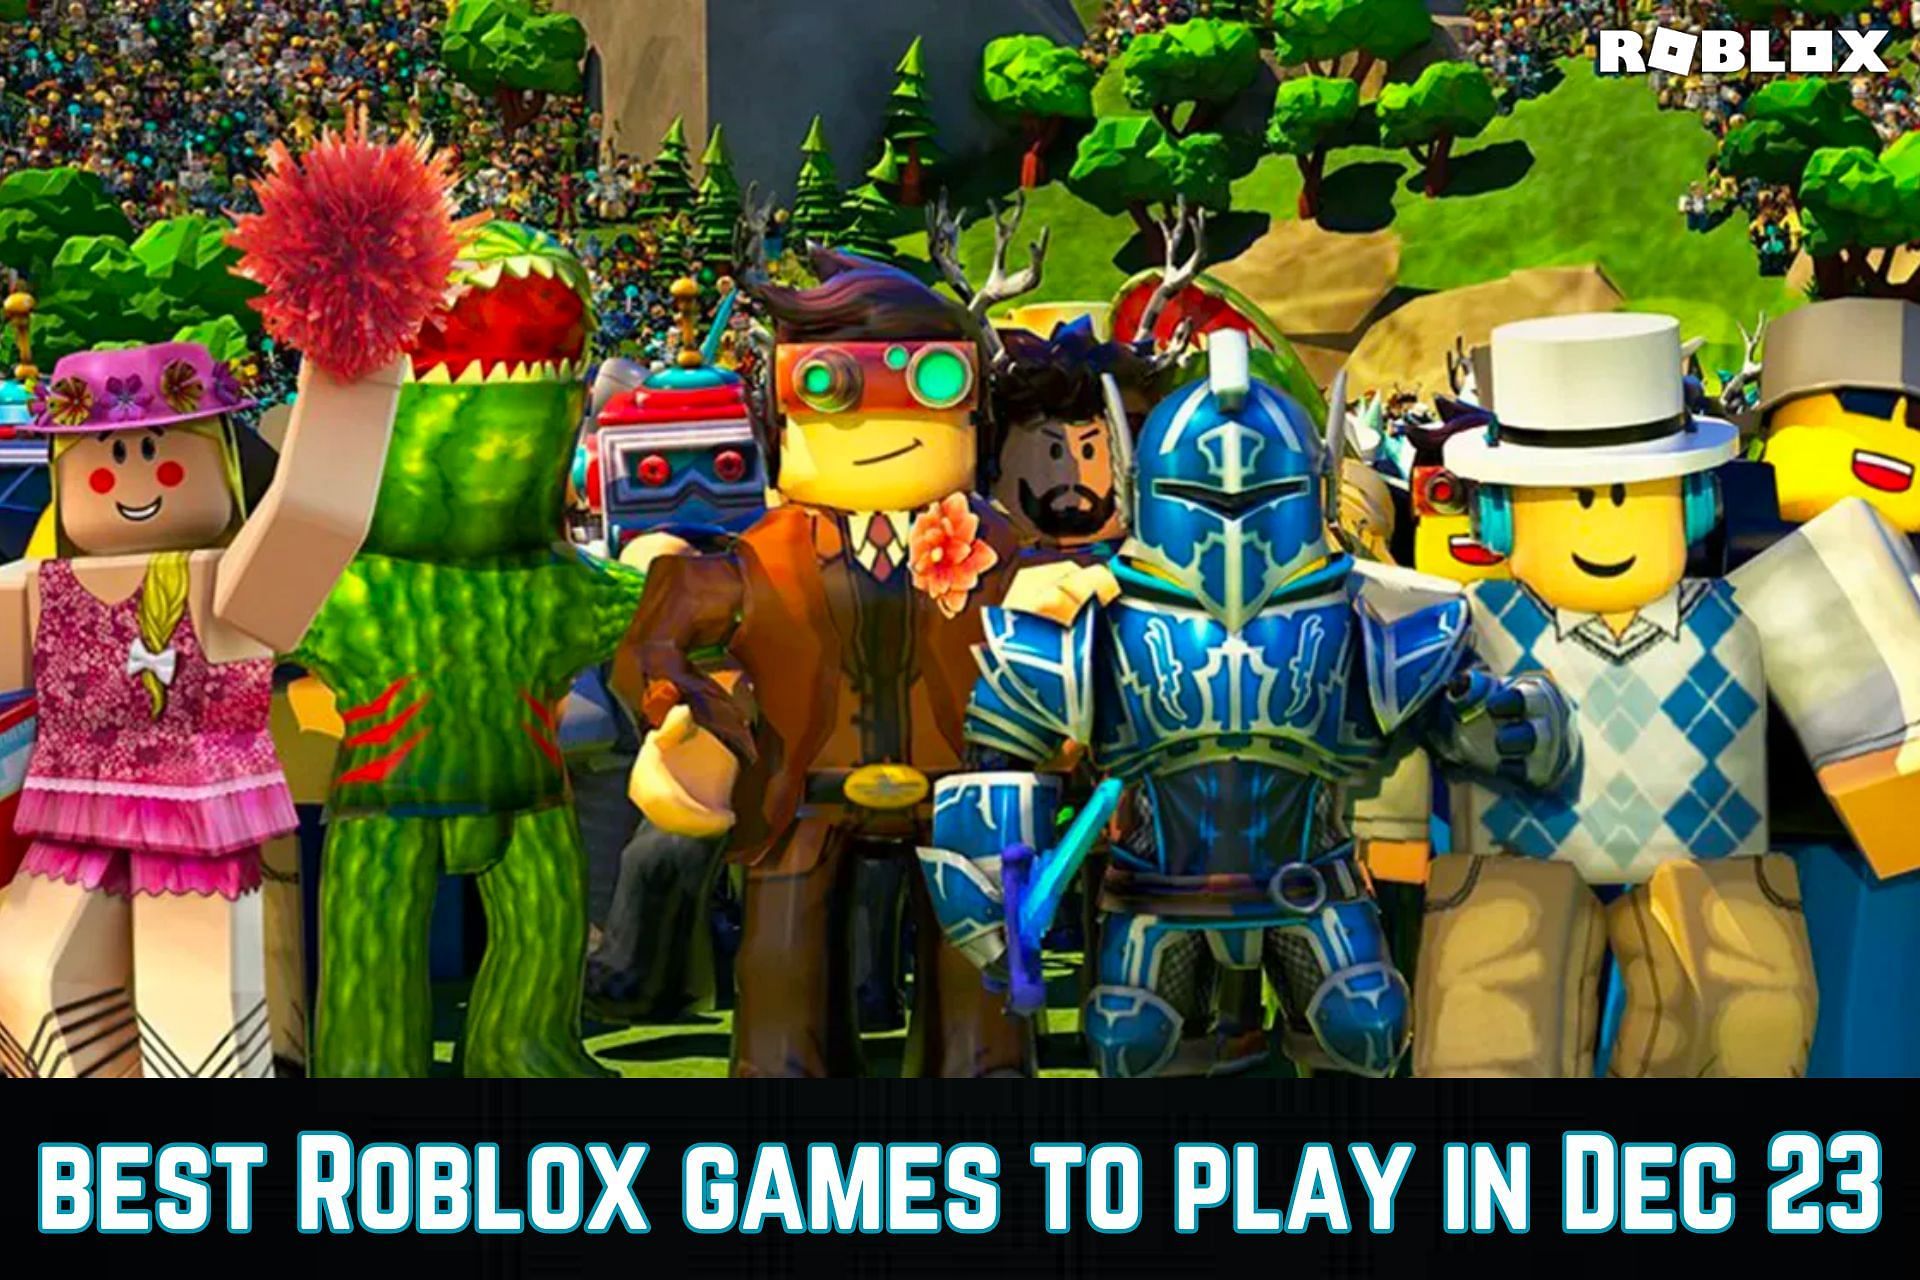 Roblox Most Played Games V2 (December 2003 - Present)